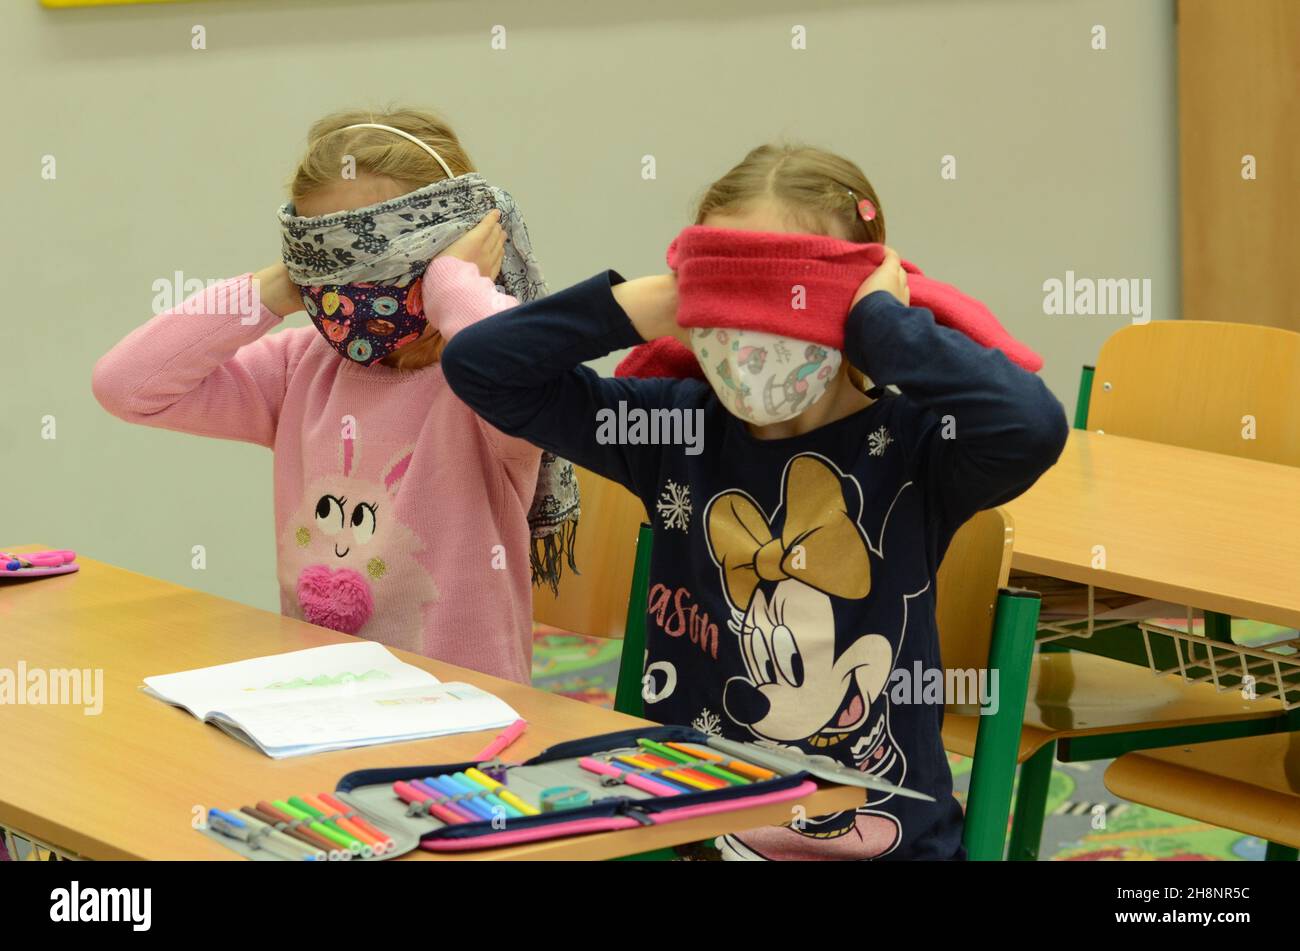 children at school and their expression, protest, refusal, rebel Stock Photo